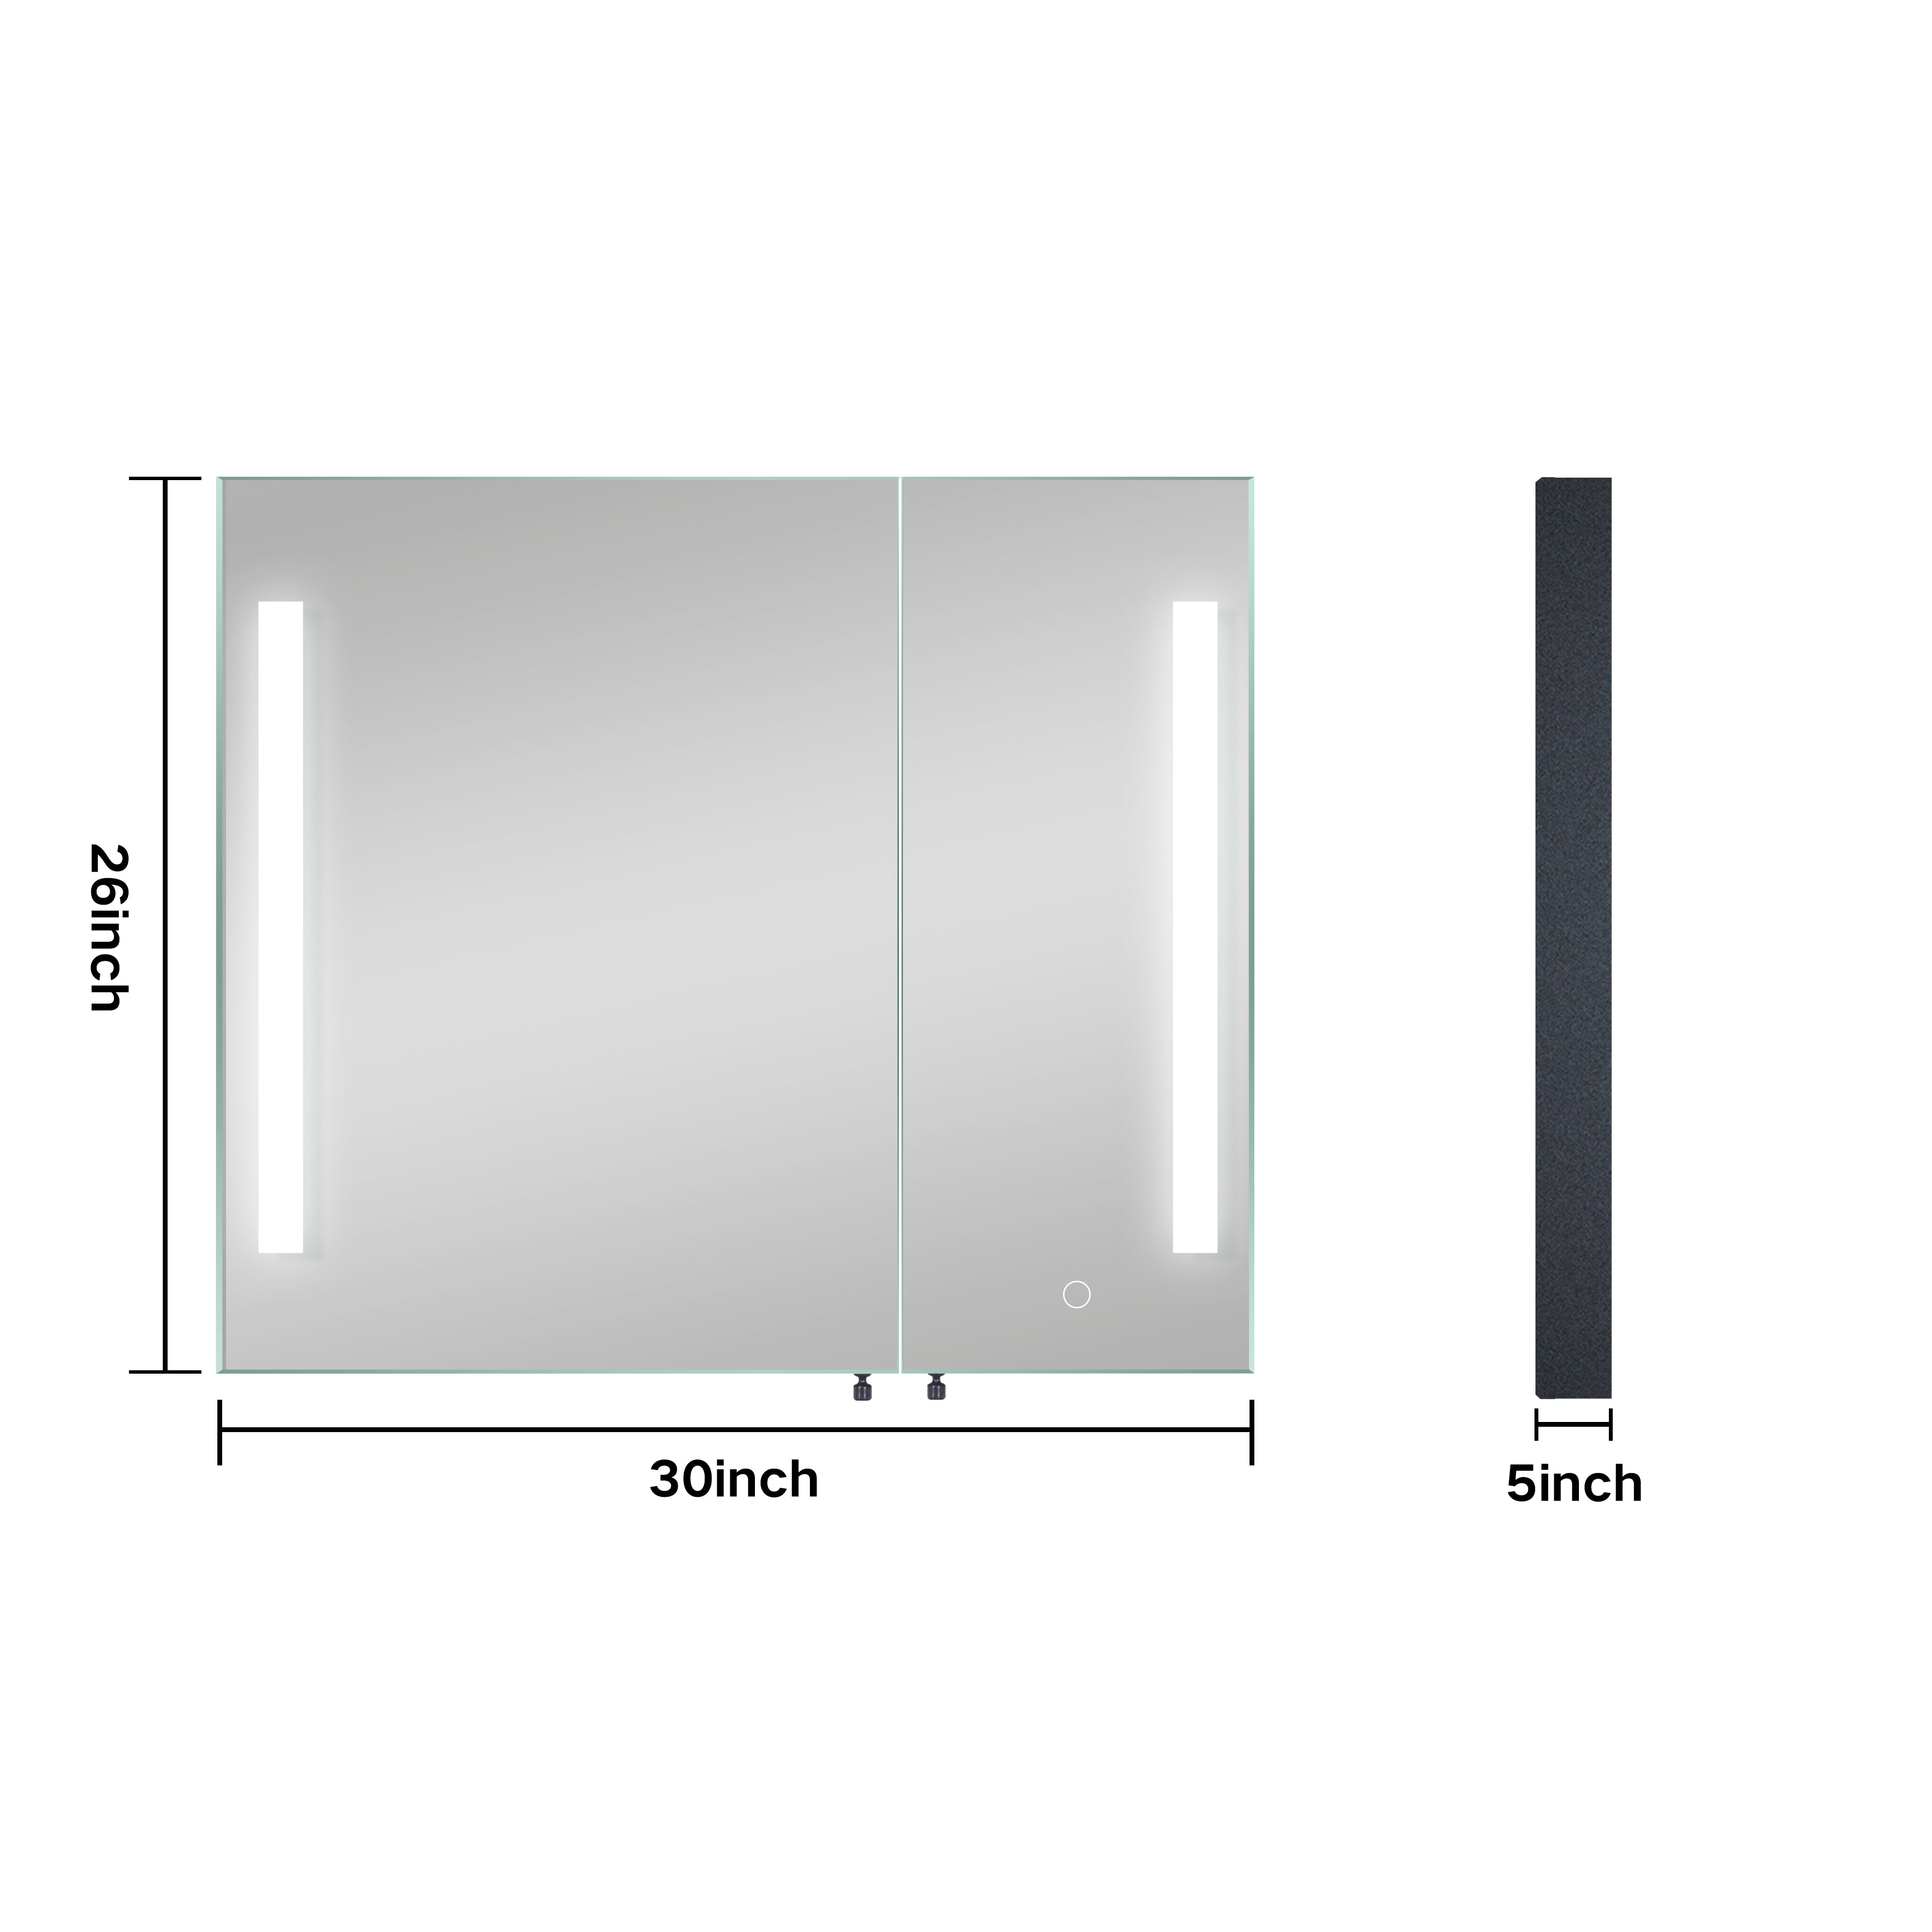 Illuminate Your Bathroom with Our 30 inches x 26 inches LED Medicine Cabinet - High Quality and Easy Installation - Eco LED Lightings 